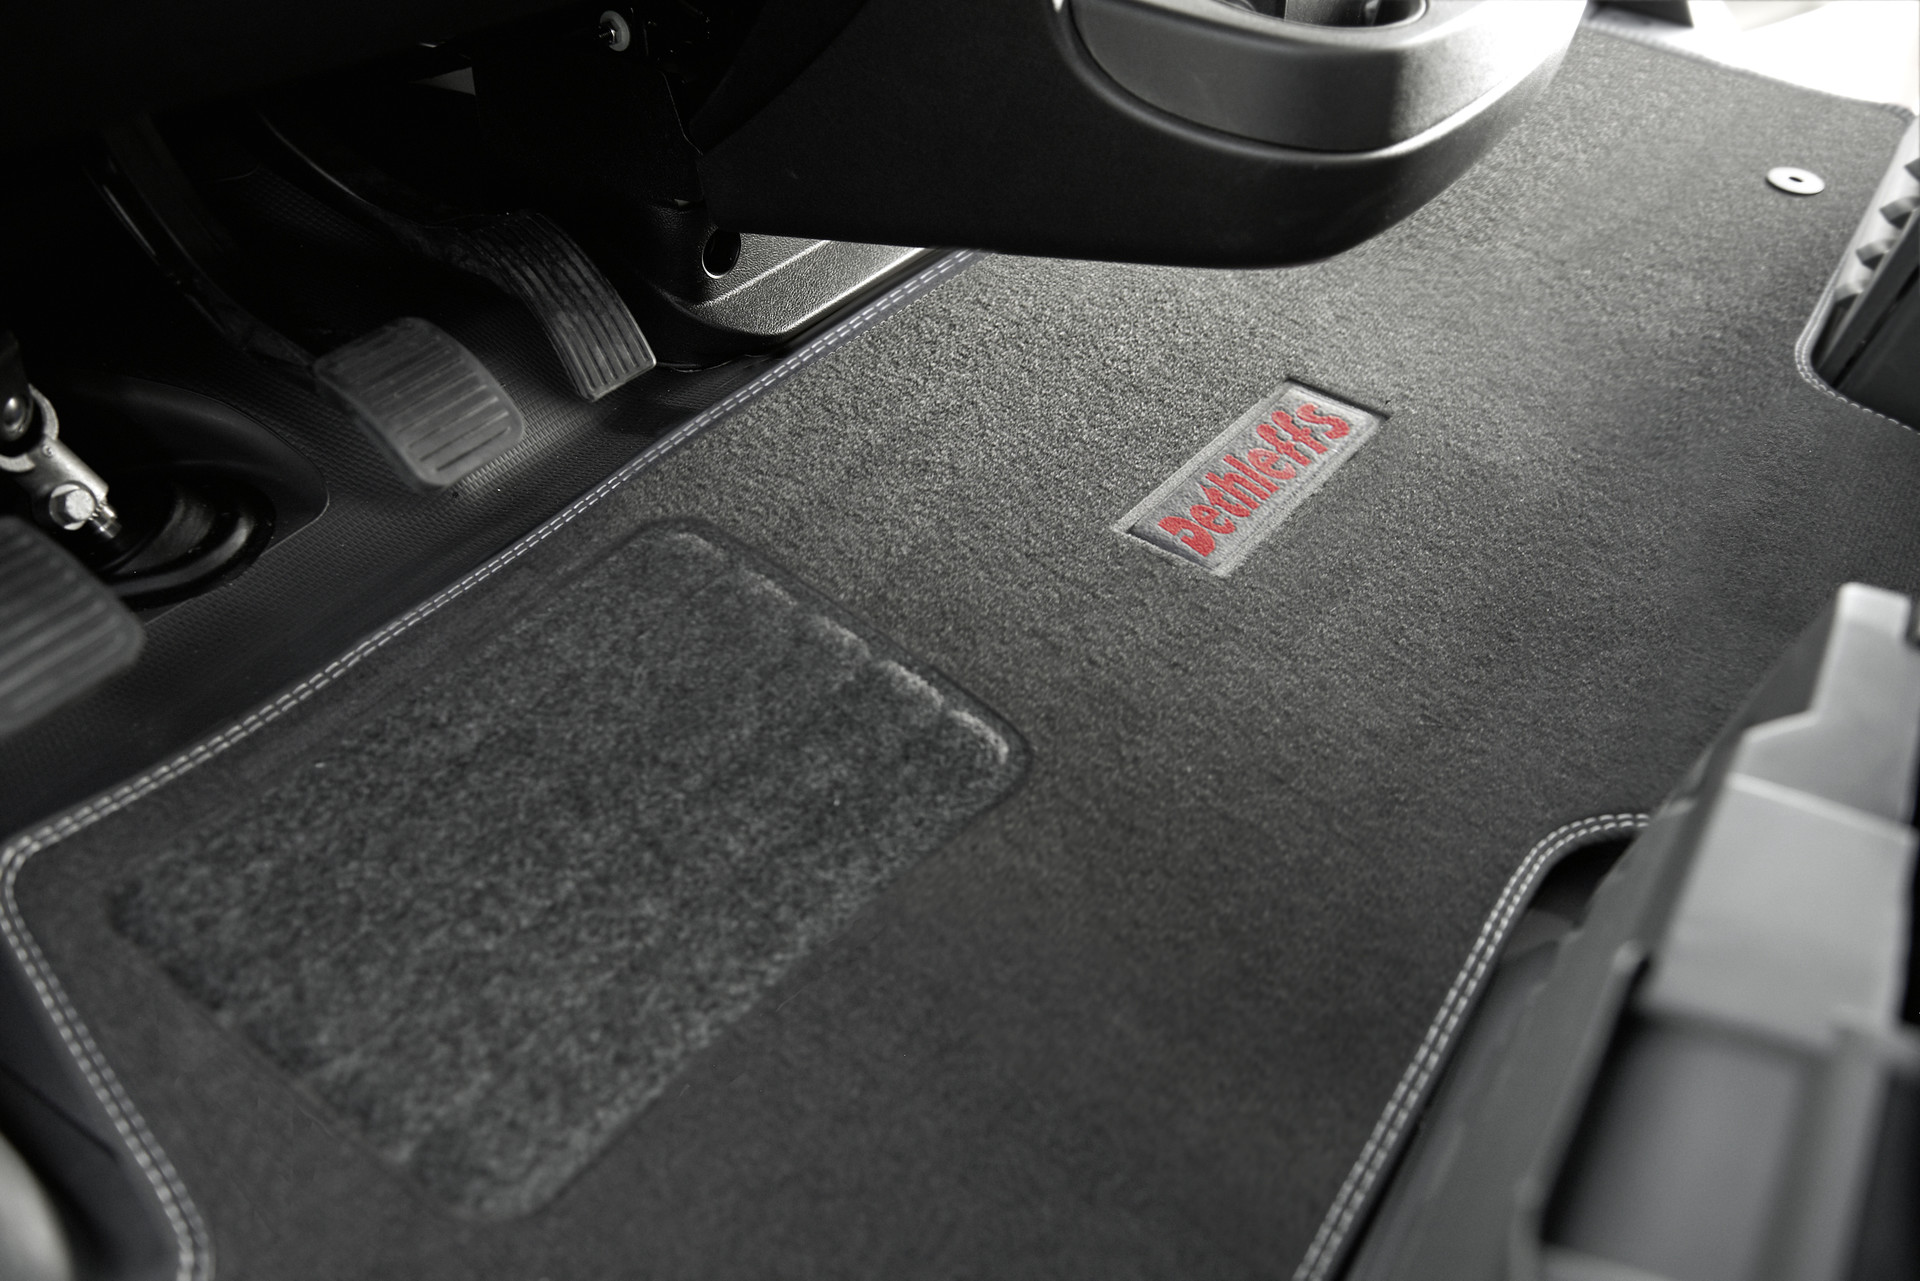 The cab carpet is tailor-made and creates a pleasant, homely atmosphere.